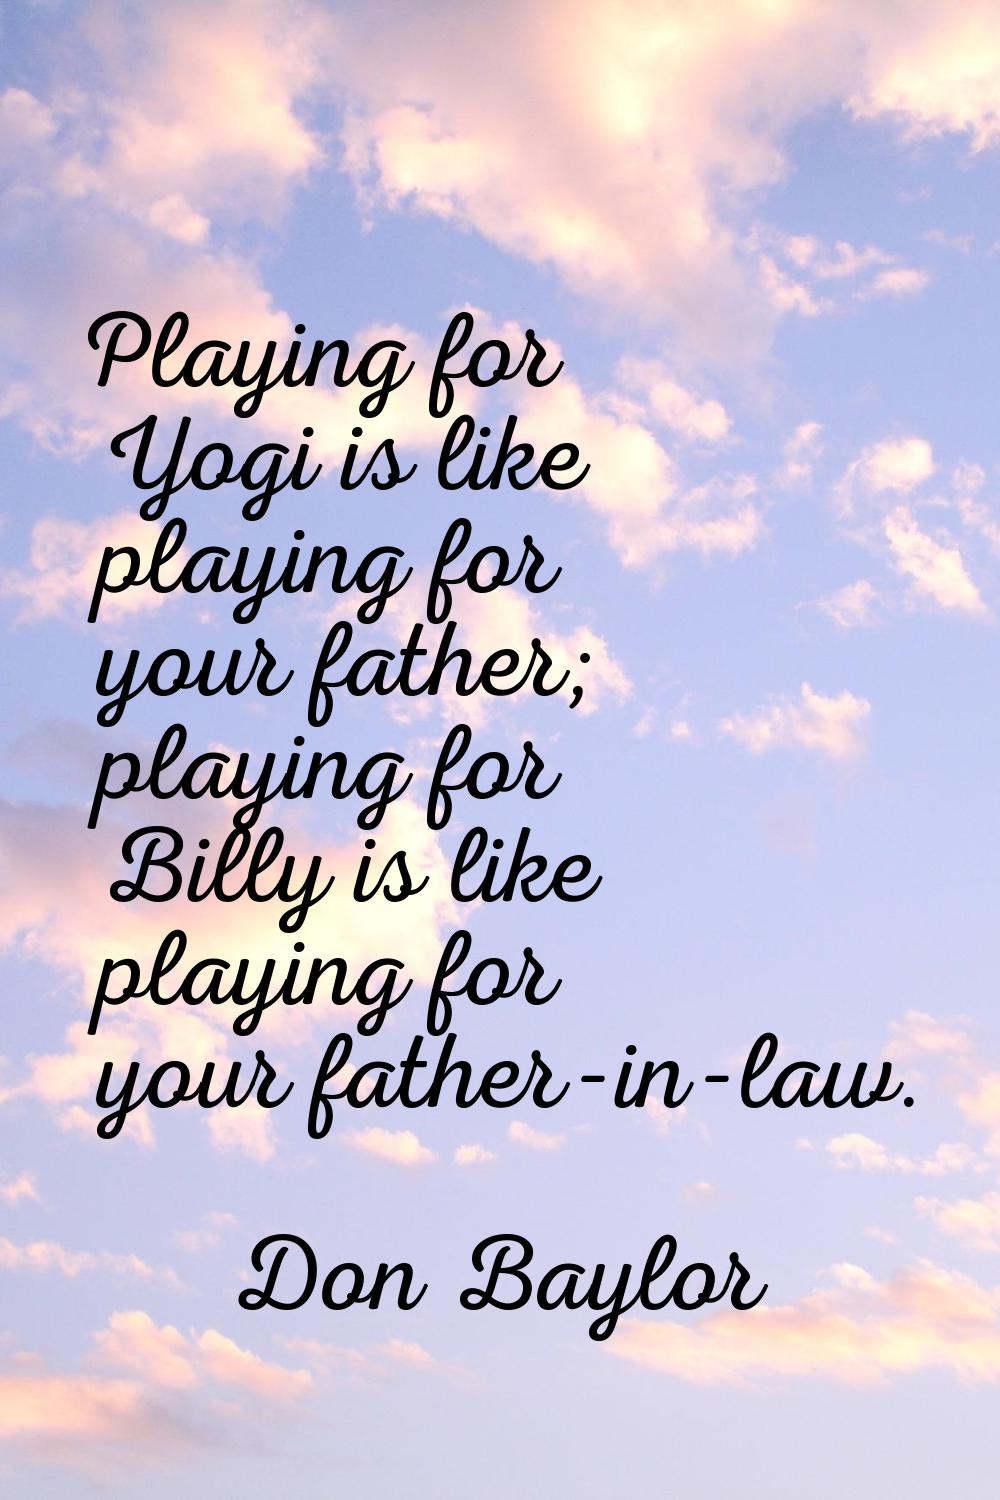 Playing for Yogi is like playing for your father; playing for Billy is like playing for your father